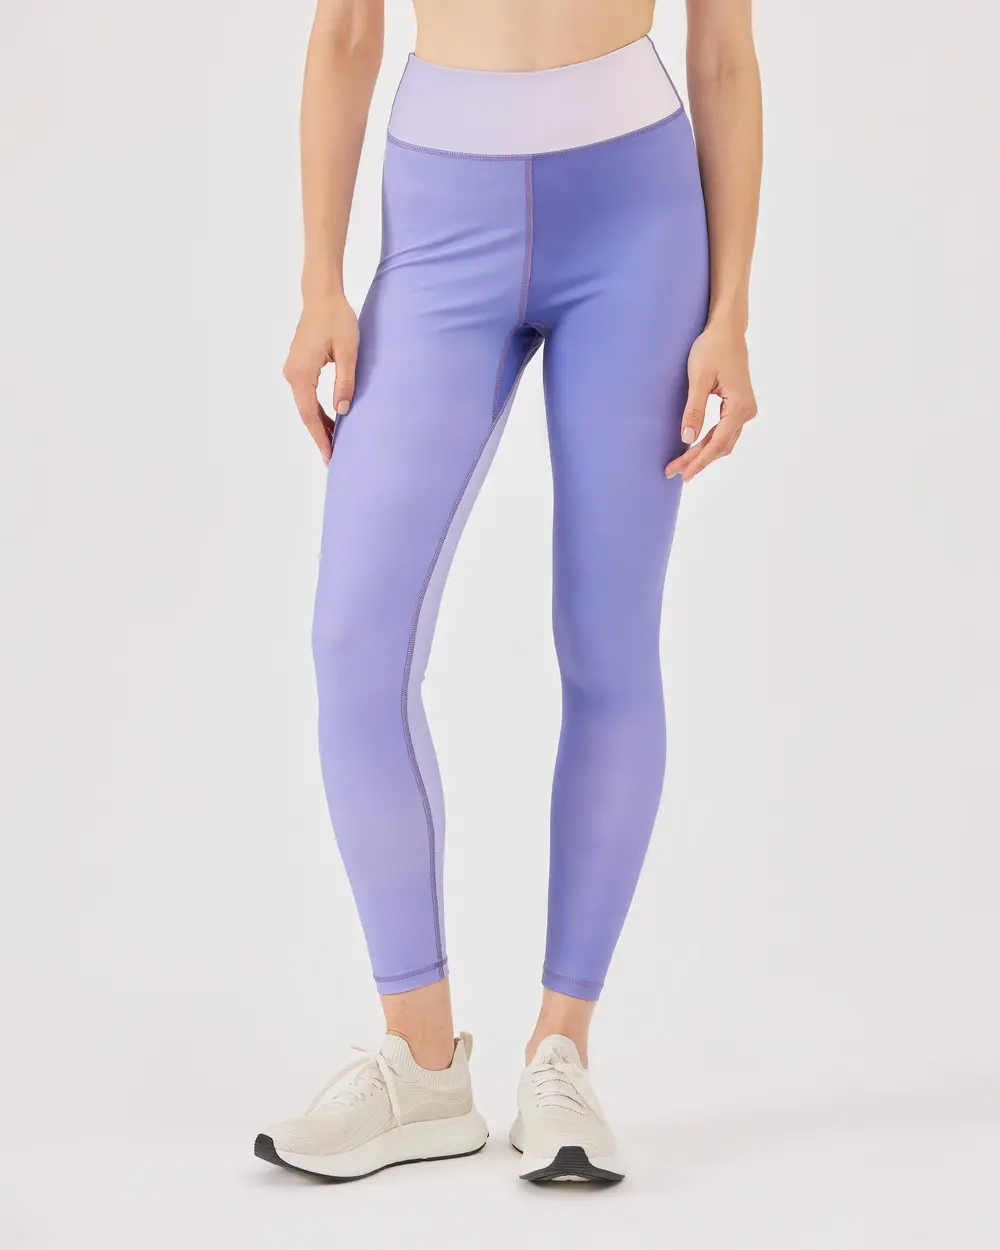 Full Length Leggings with Color Transition